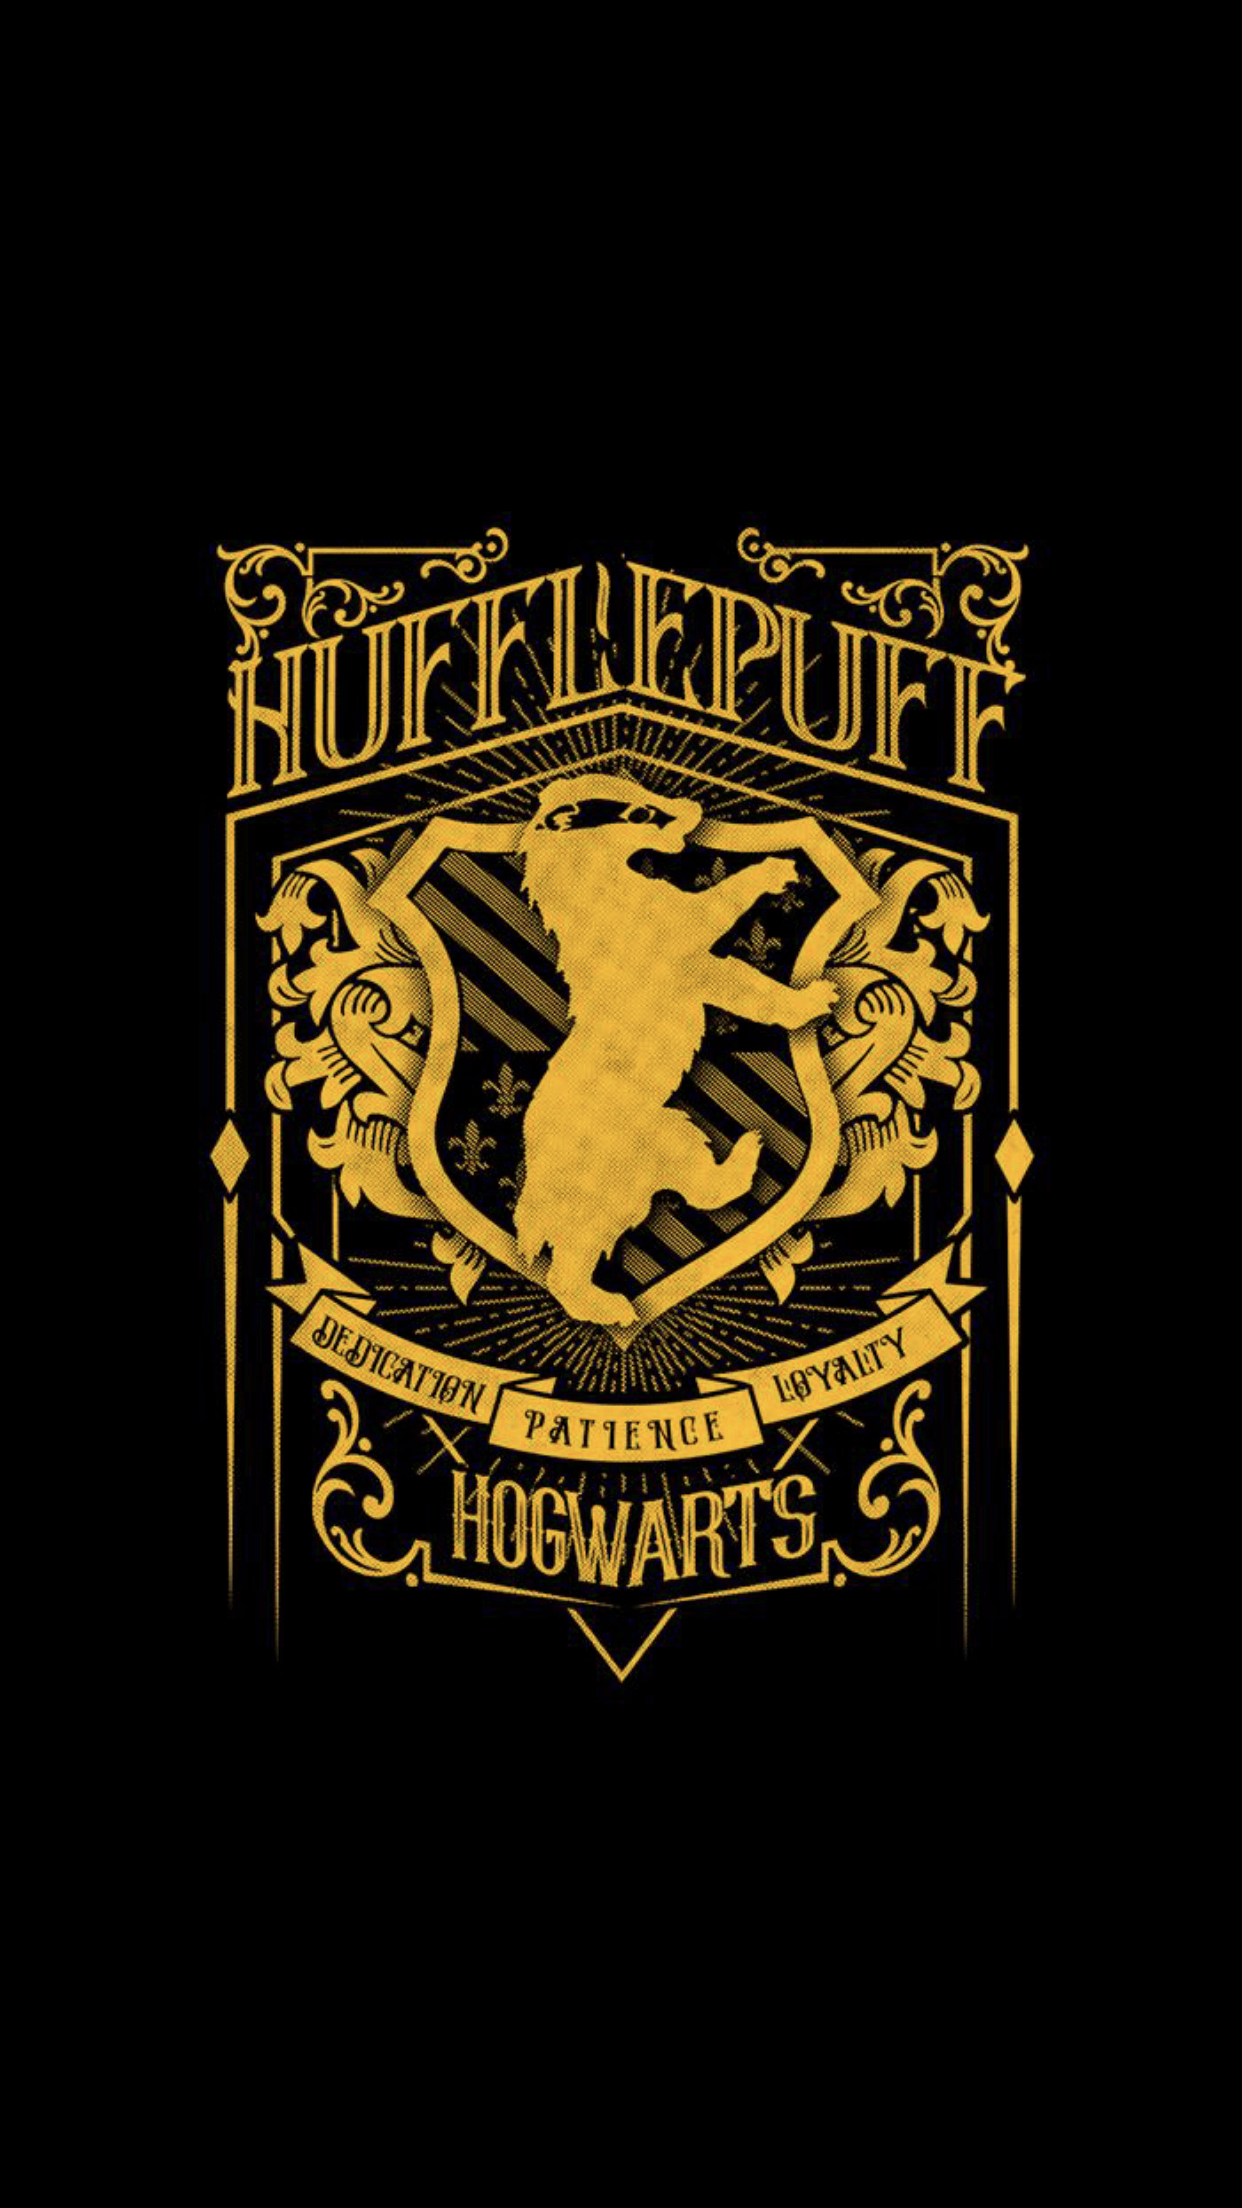 The hogwarts crest with a golden background - Hufflepuff